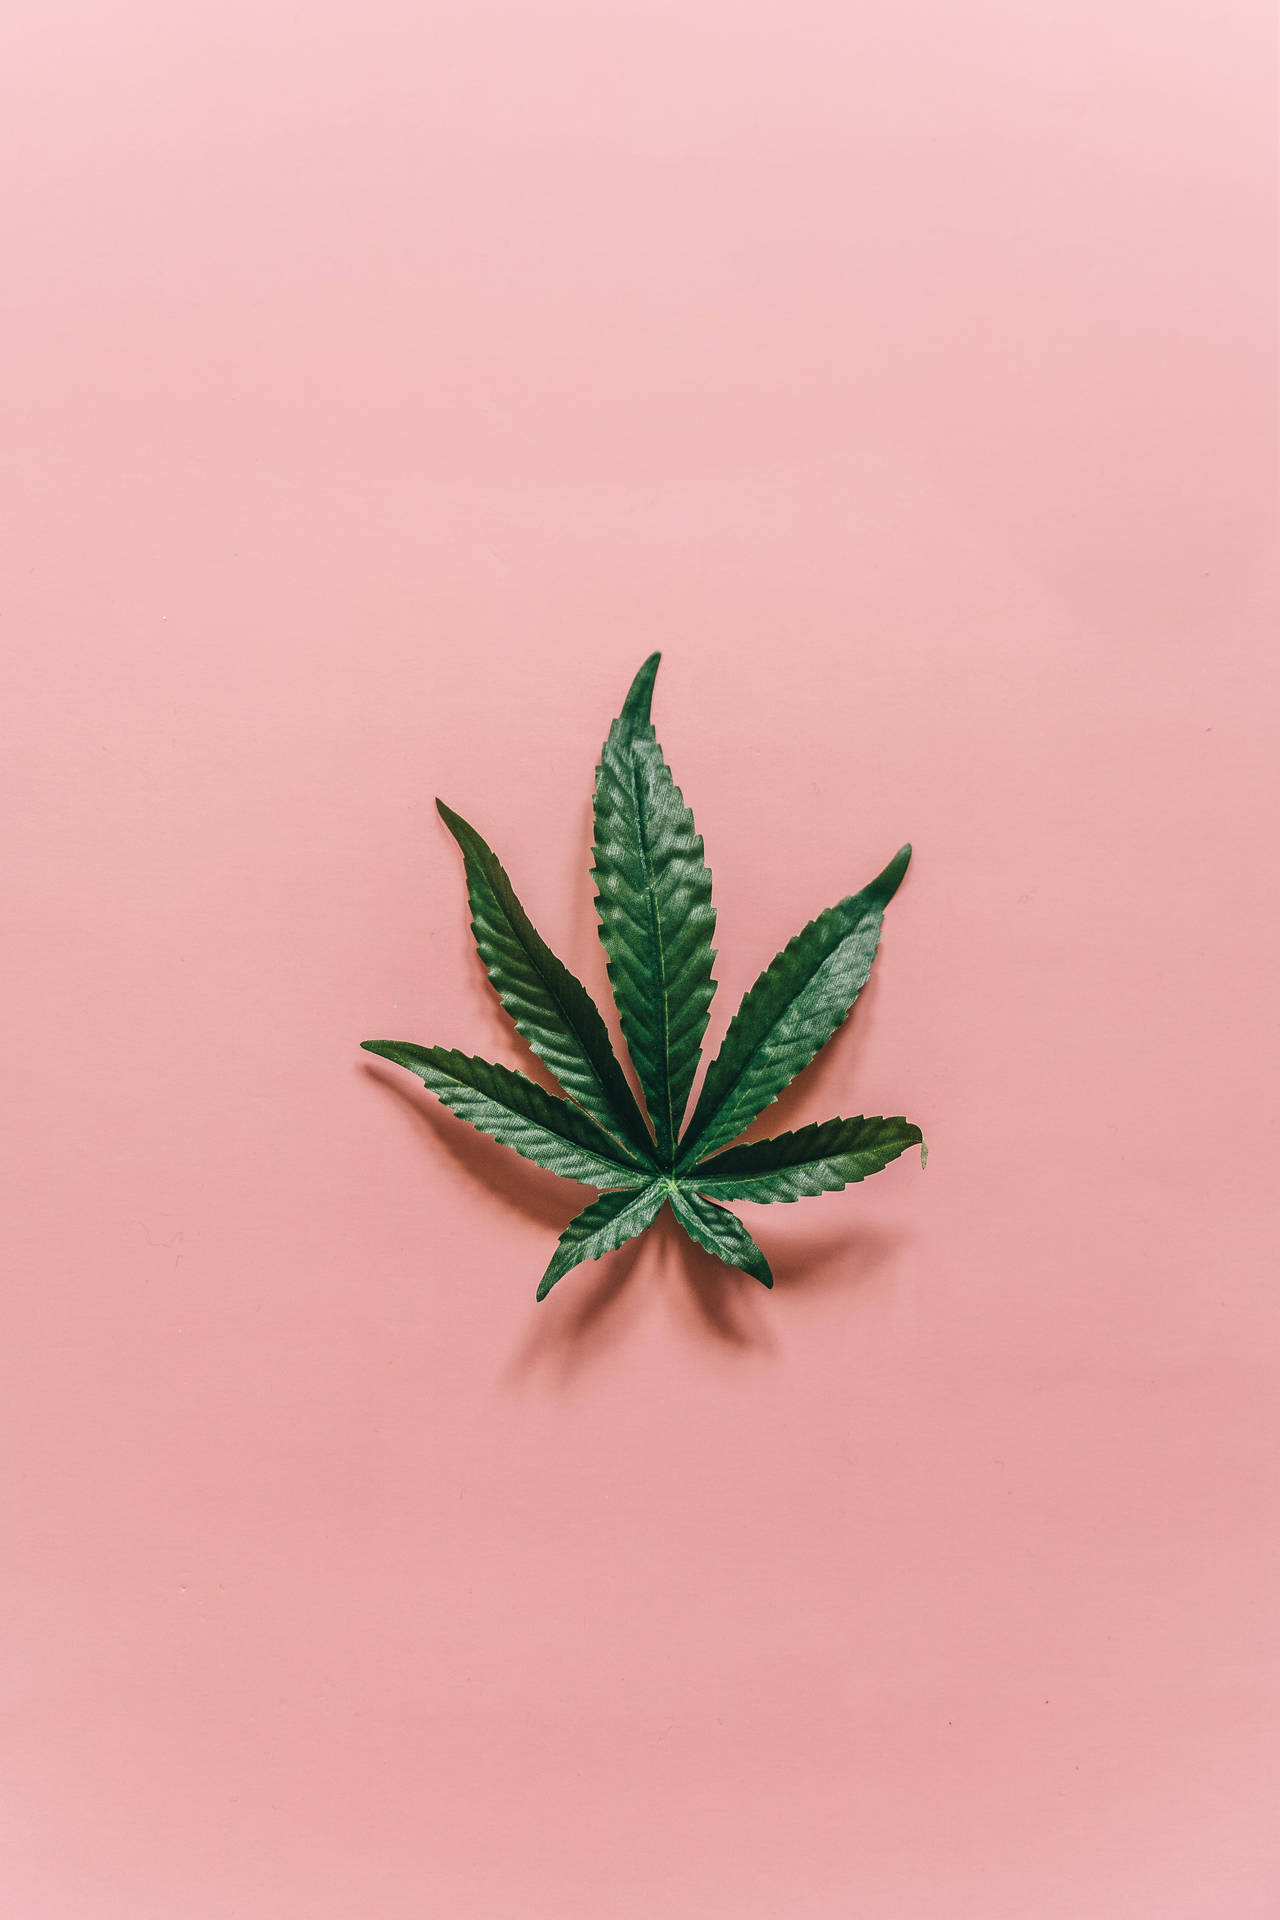 Cool Weed Pink Background